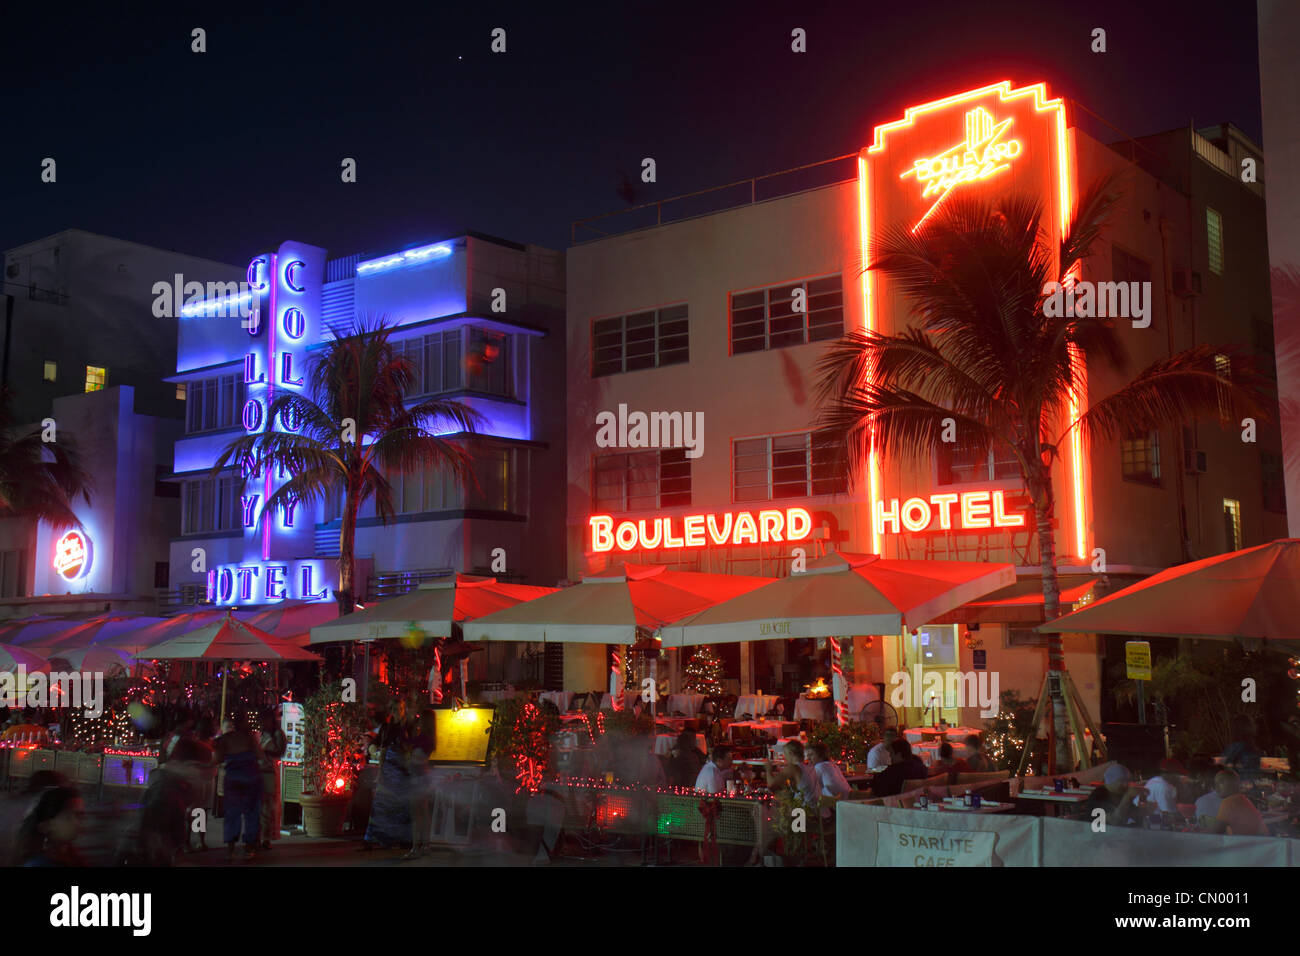 Miami Beach Florida,Ocean Drive,Art Deco Historic District,Colony & Boulevard,hotel,New Year's Eve,night evening,palm trees,lighting,neon sign,al fres Stock Photo